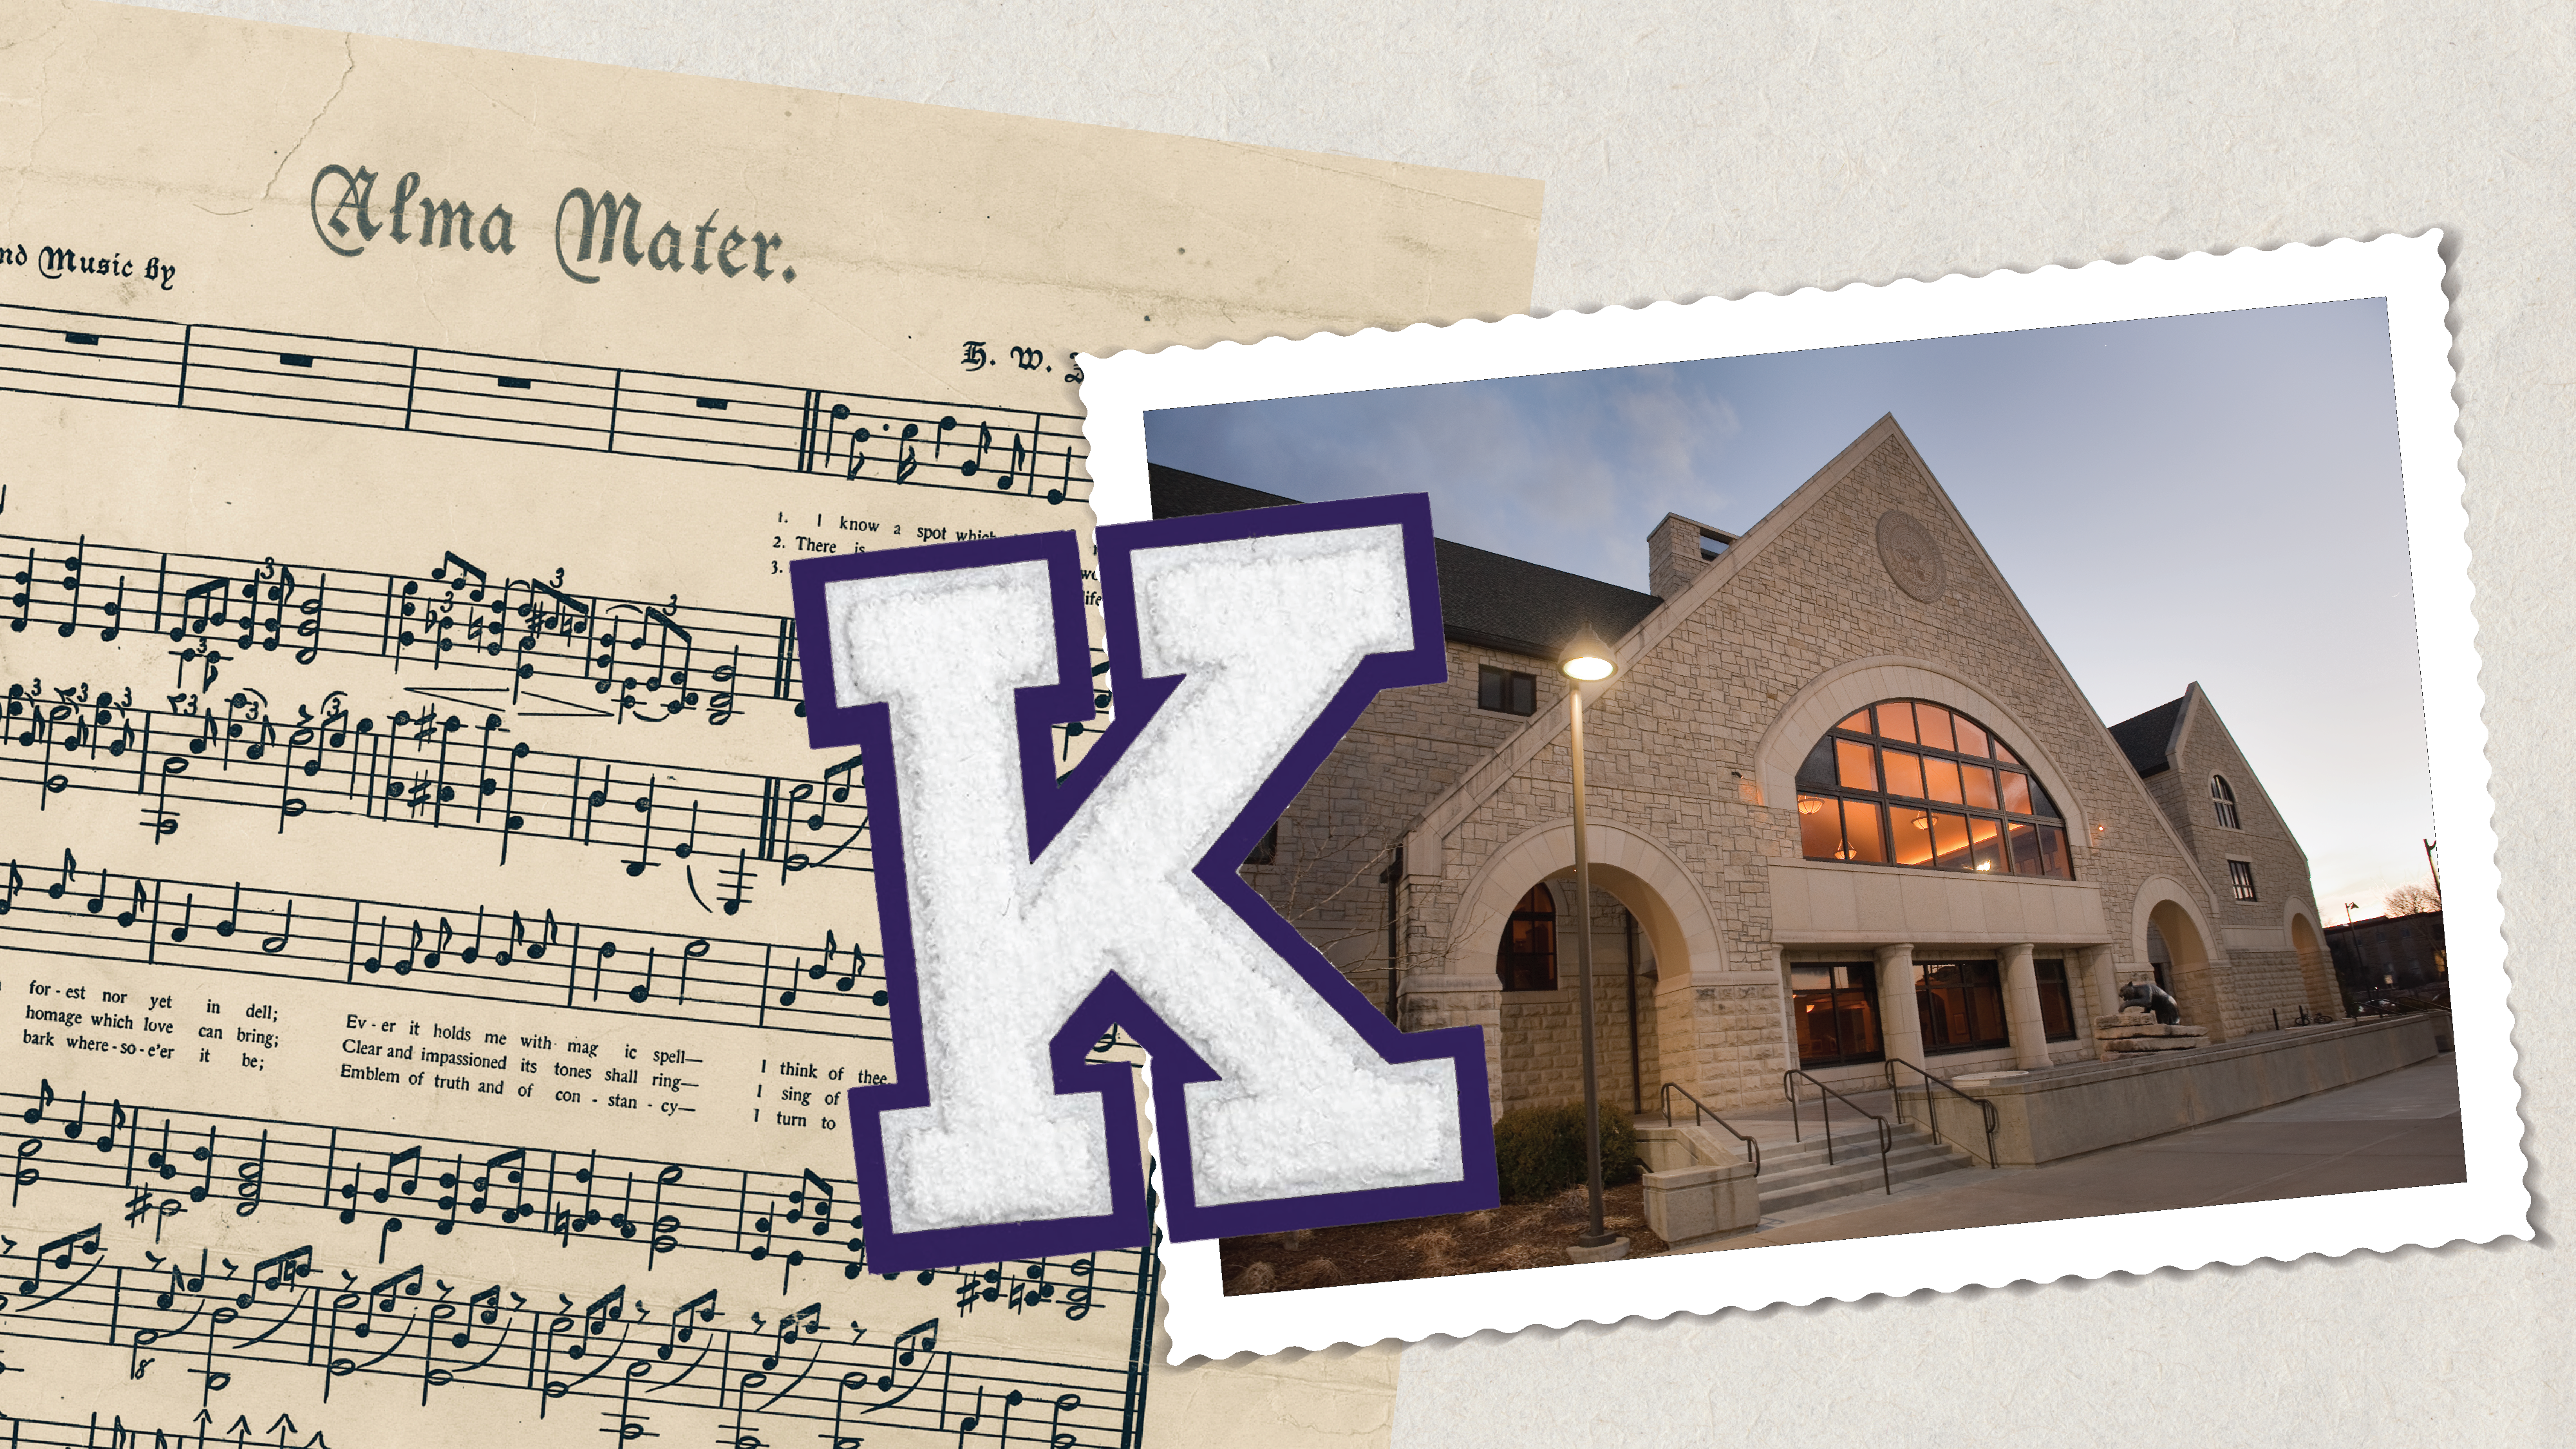 Alma Mater sheet music, varsity letter K and a photo of the K-State Alumni Center